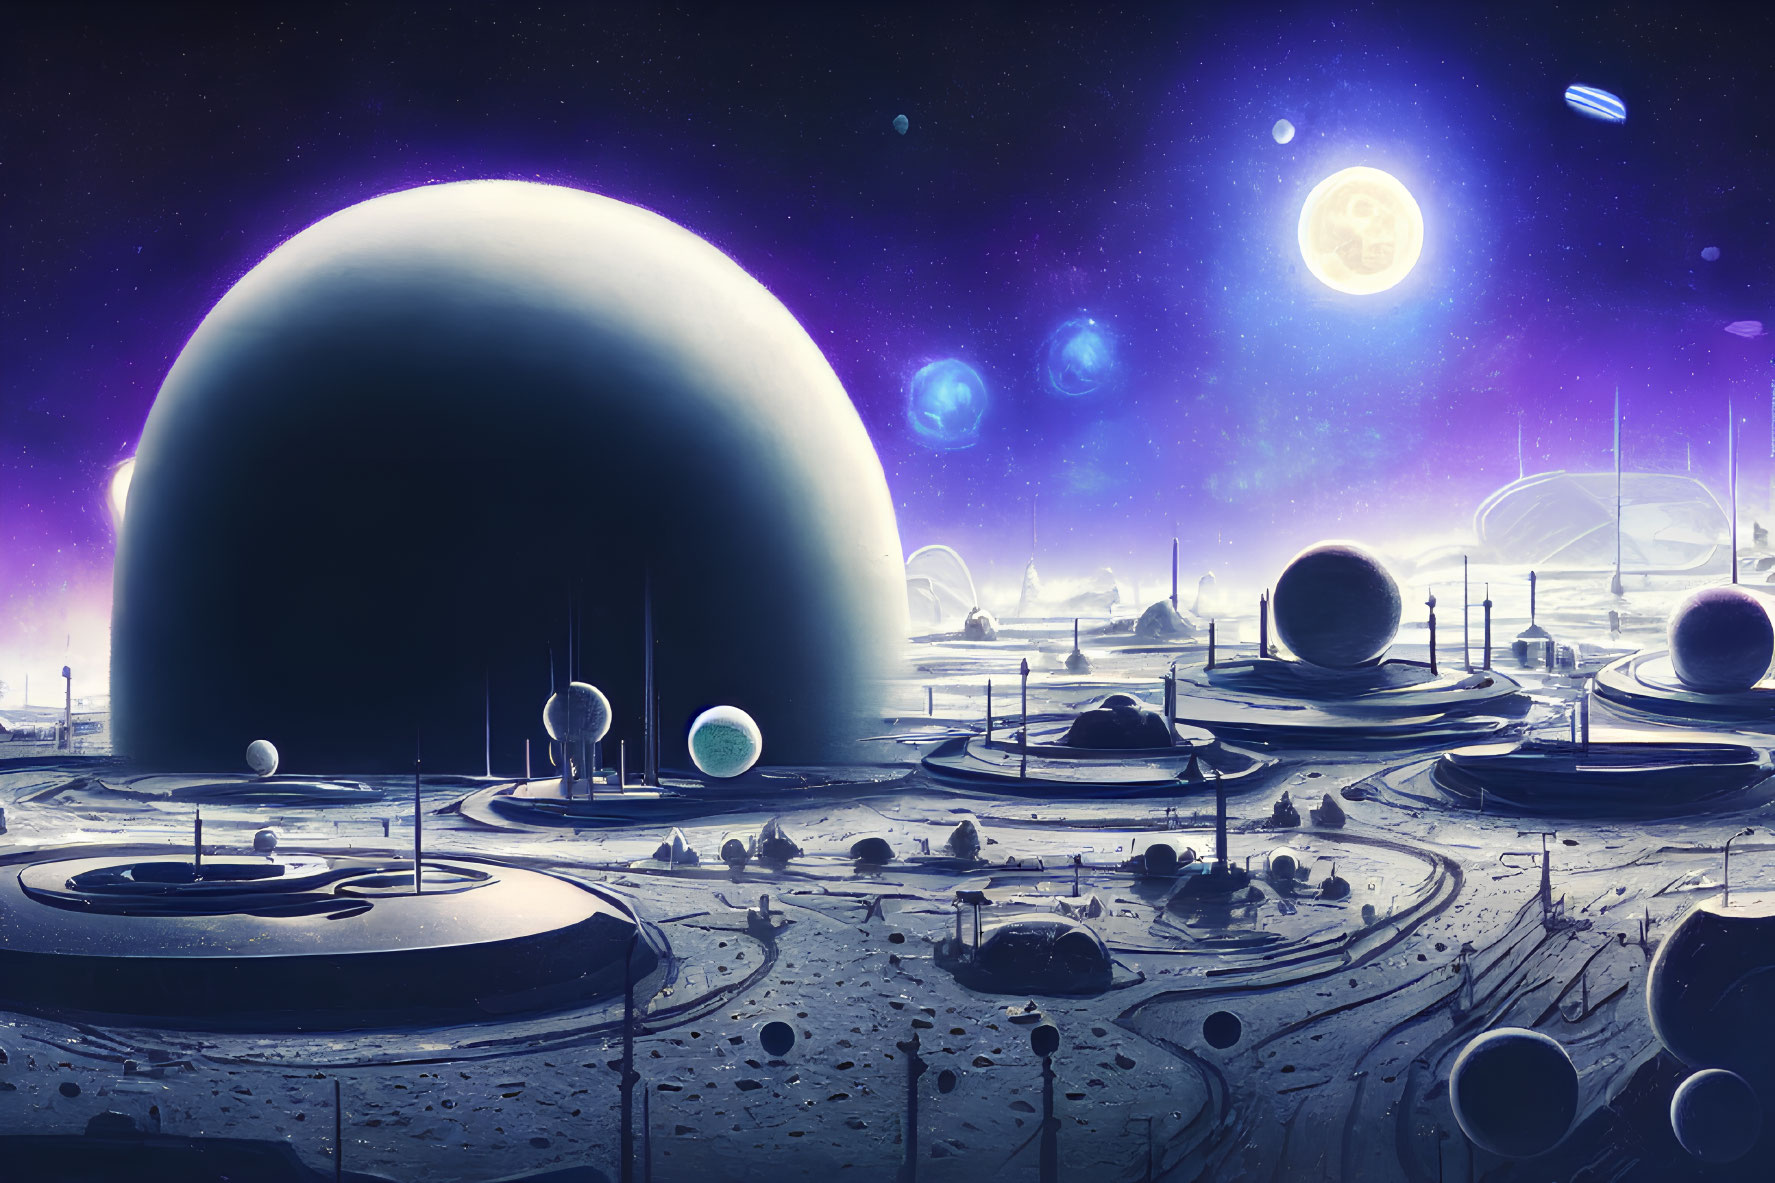 Futuristic space scene with planet, moons, stars, and settlement.